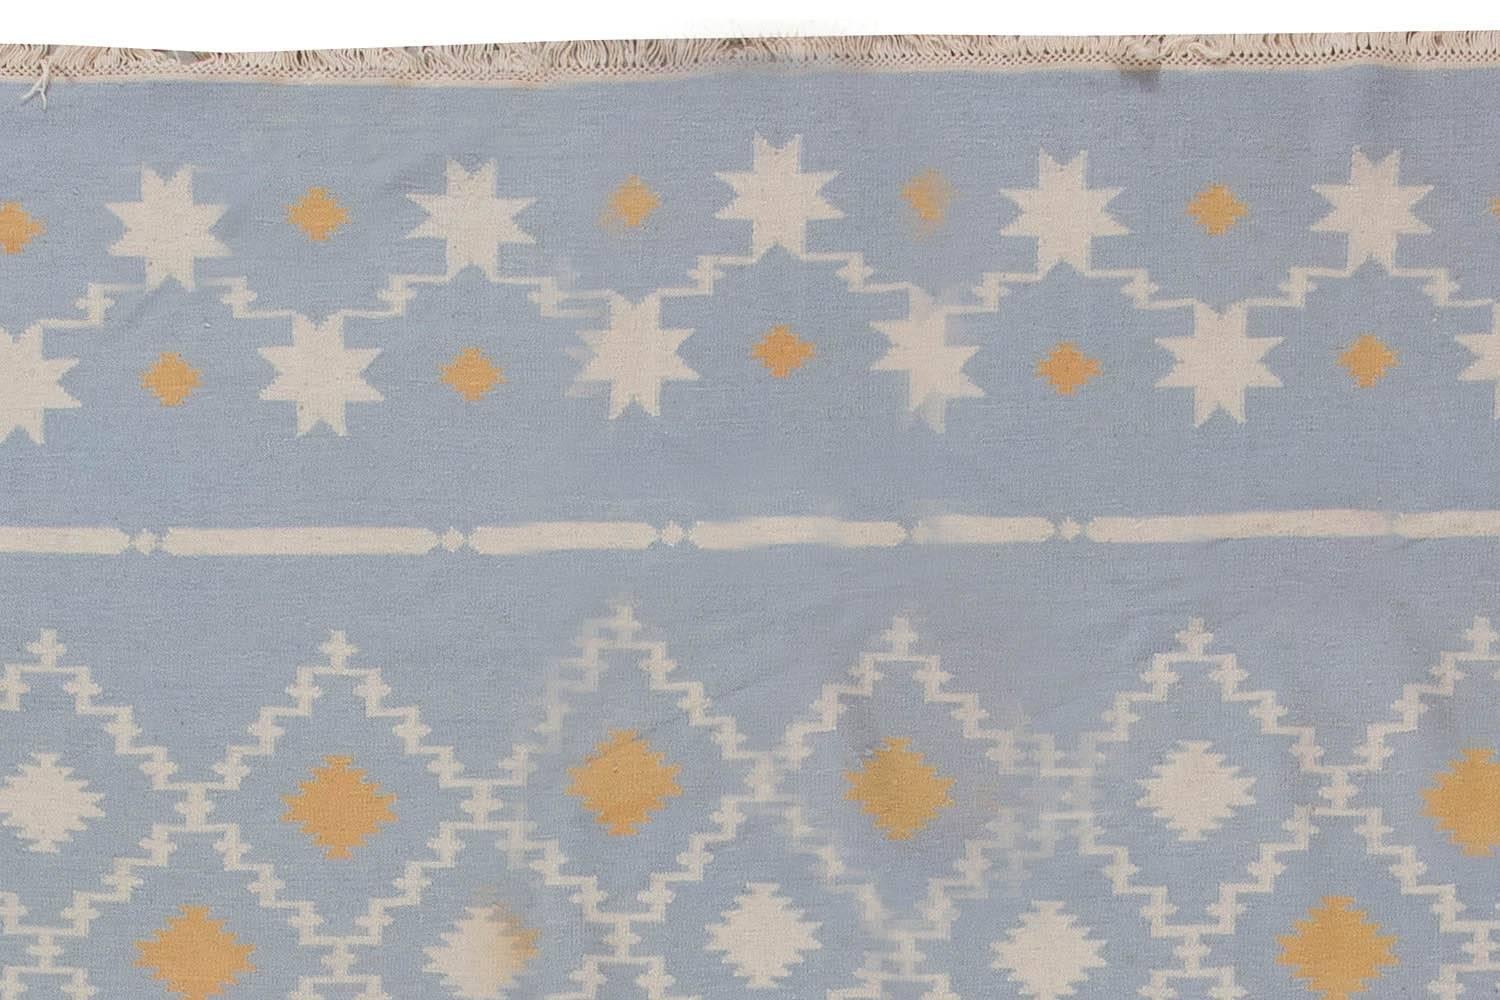 Hand-Woven Mid-20th Century Blue, White, Orange Indian Dhurrie Flat-Weave Cotton Rug